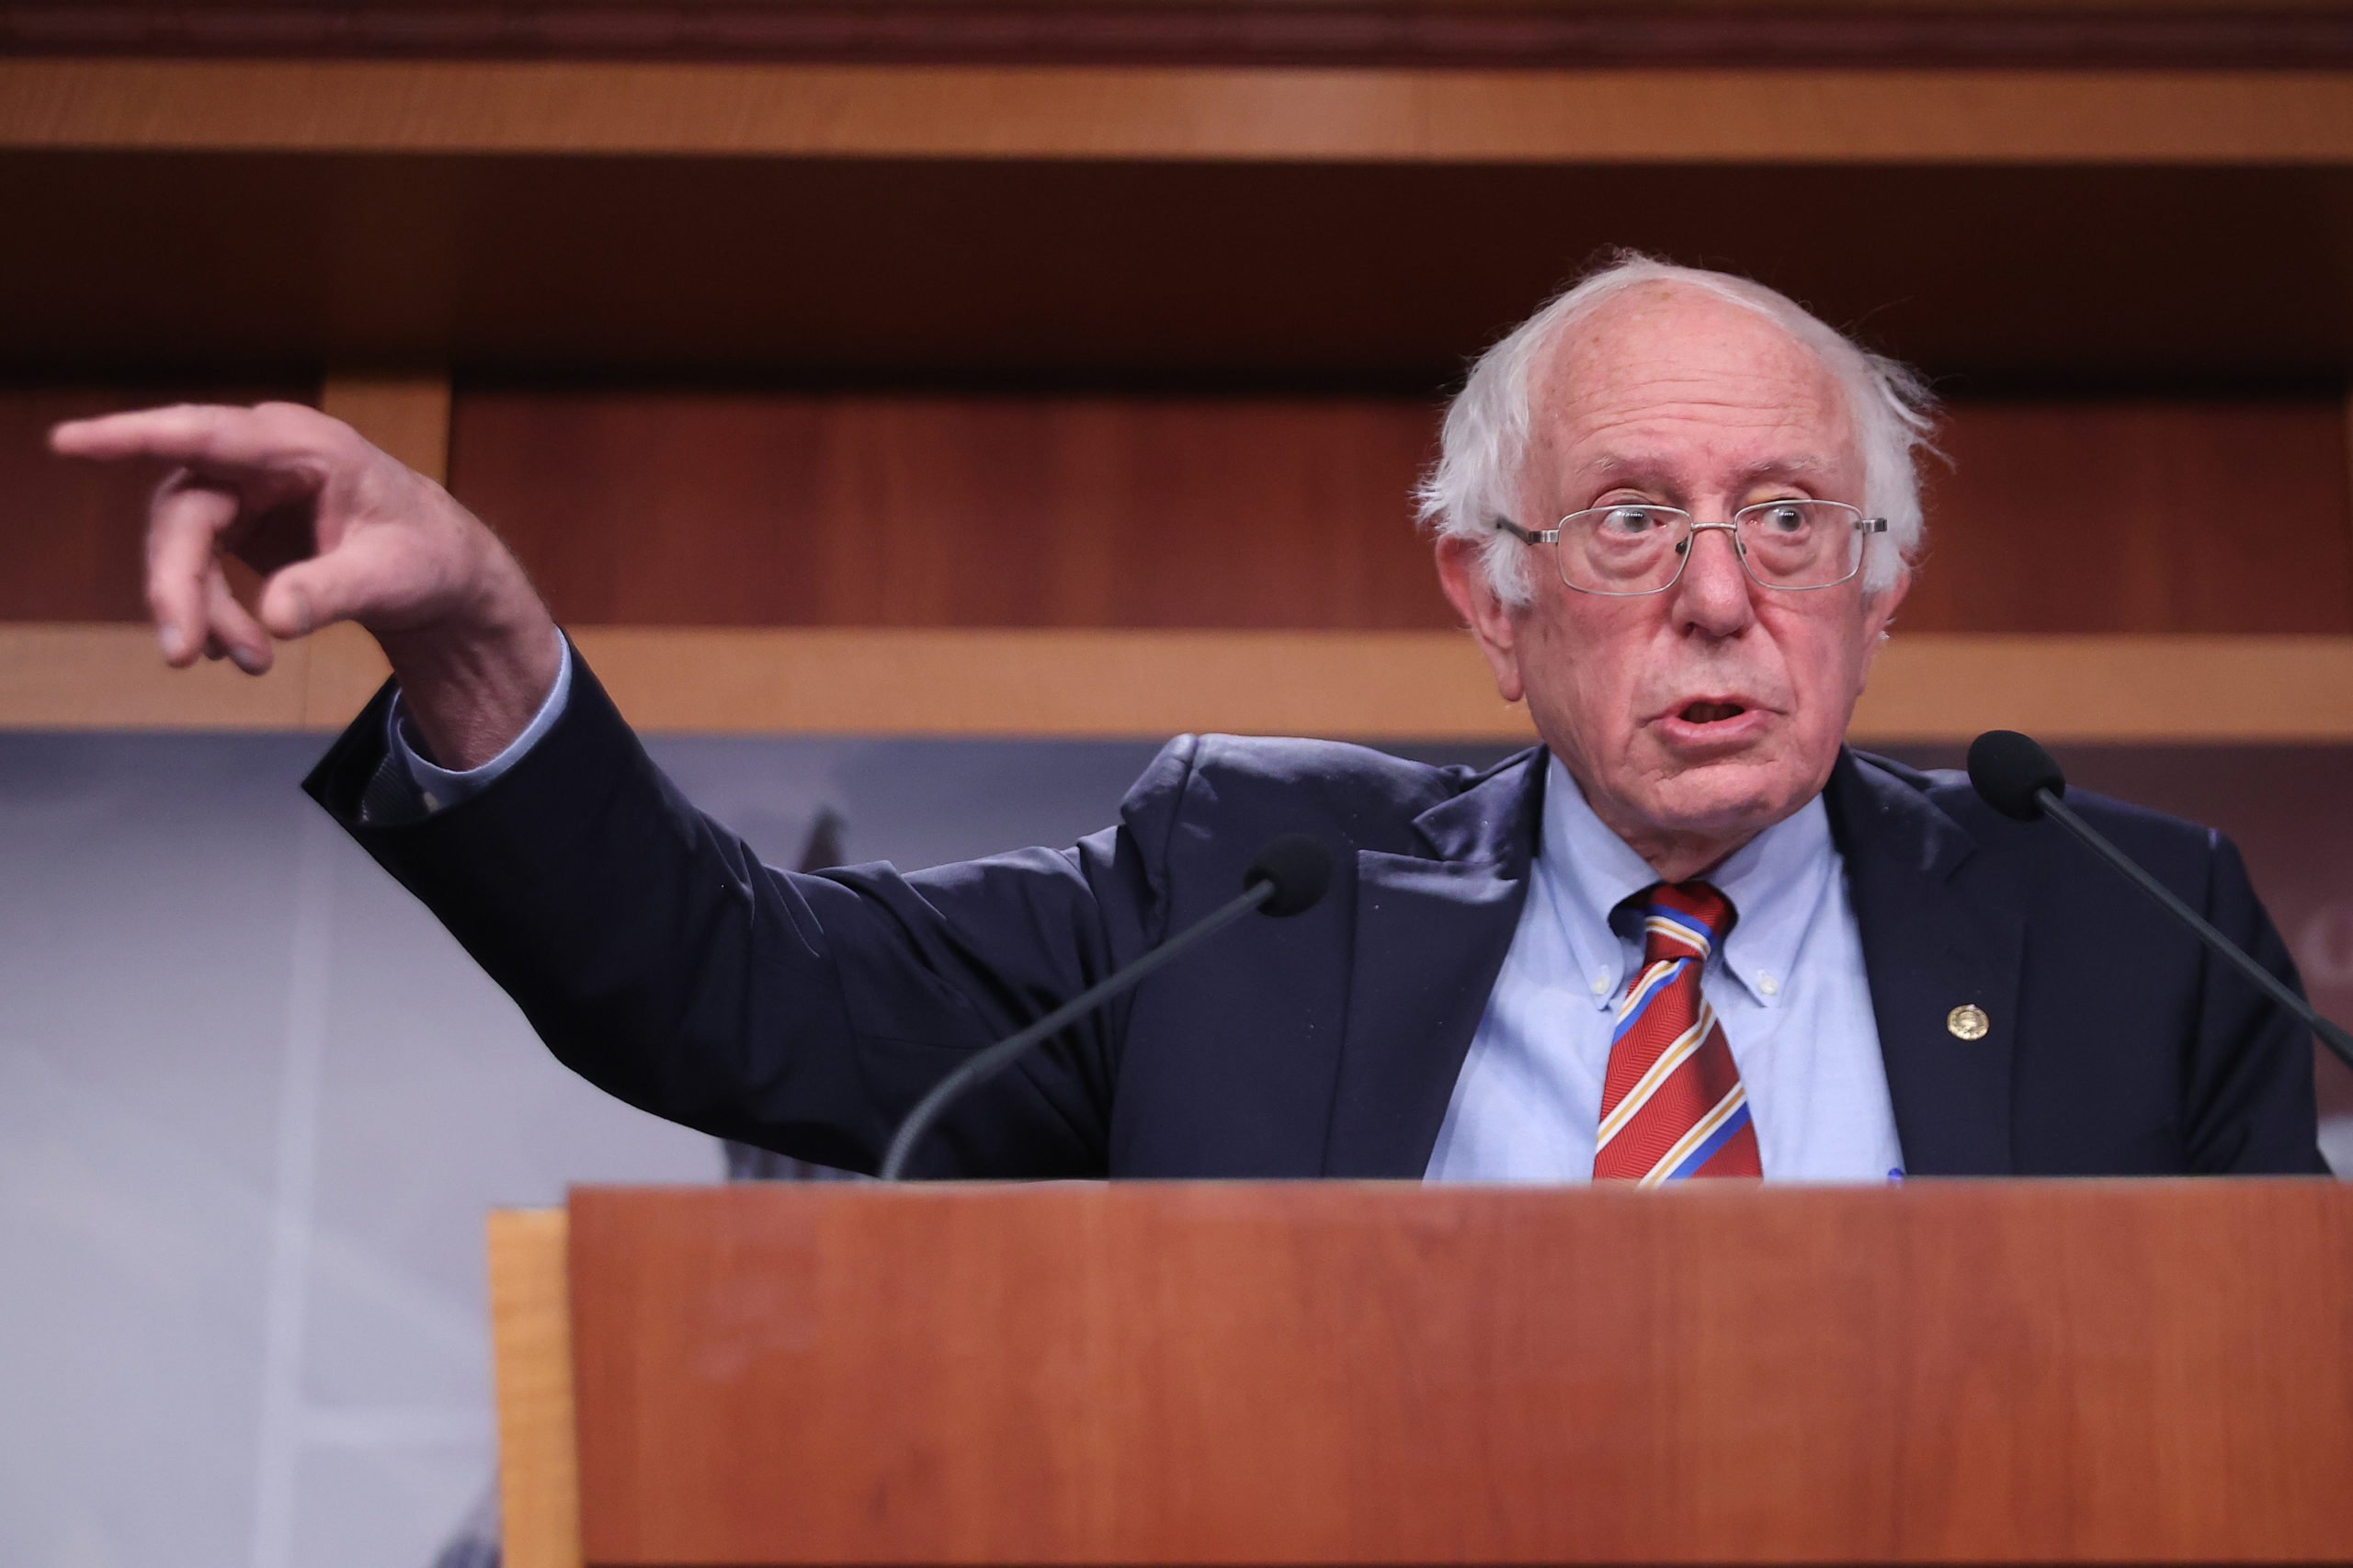 Sen. Bernie Sanders holds a news conference about state and local tax deductions in early November. (Chip Somodevilla/Getty Images)